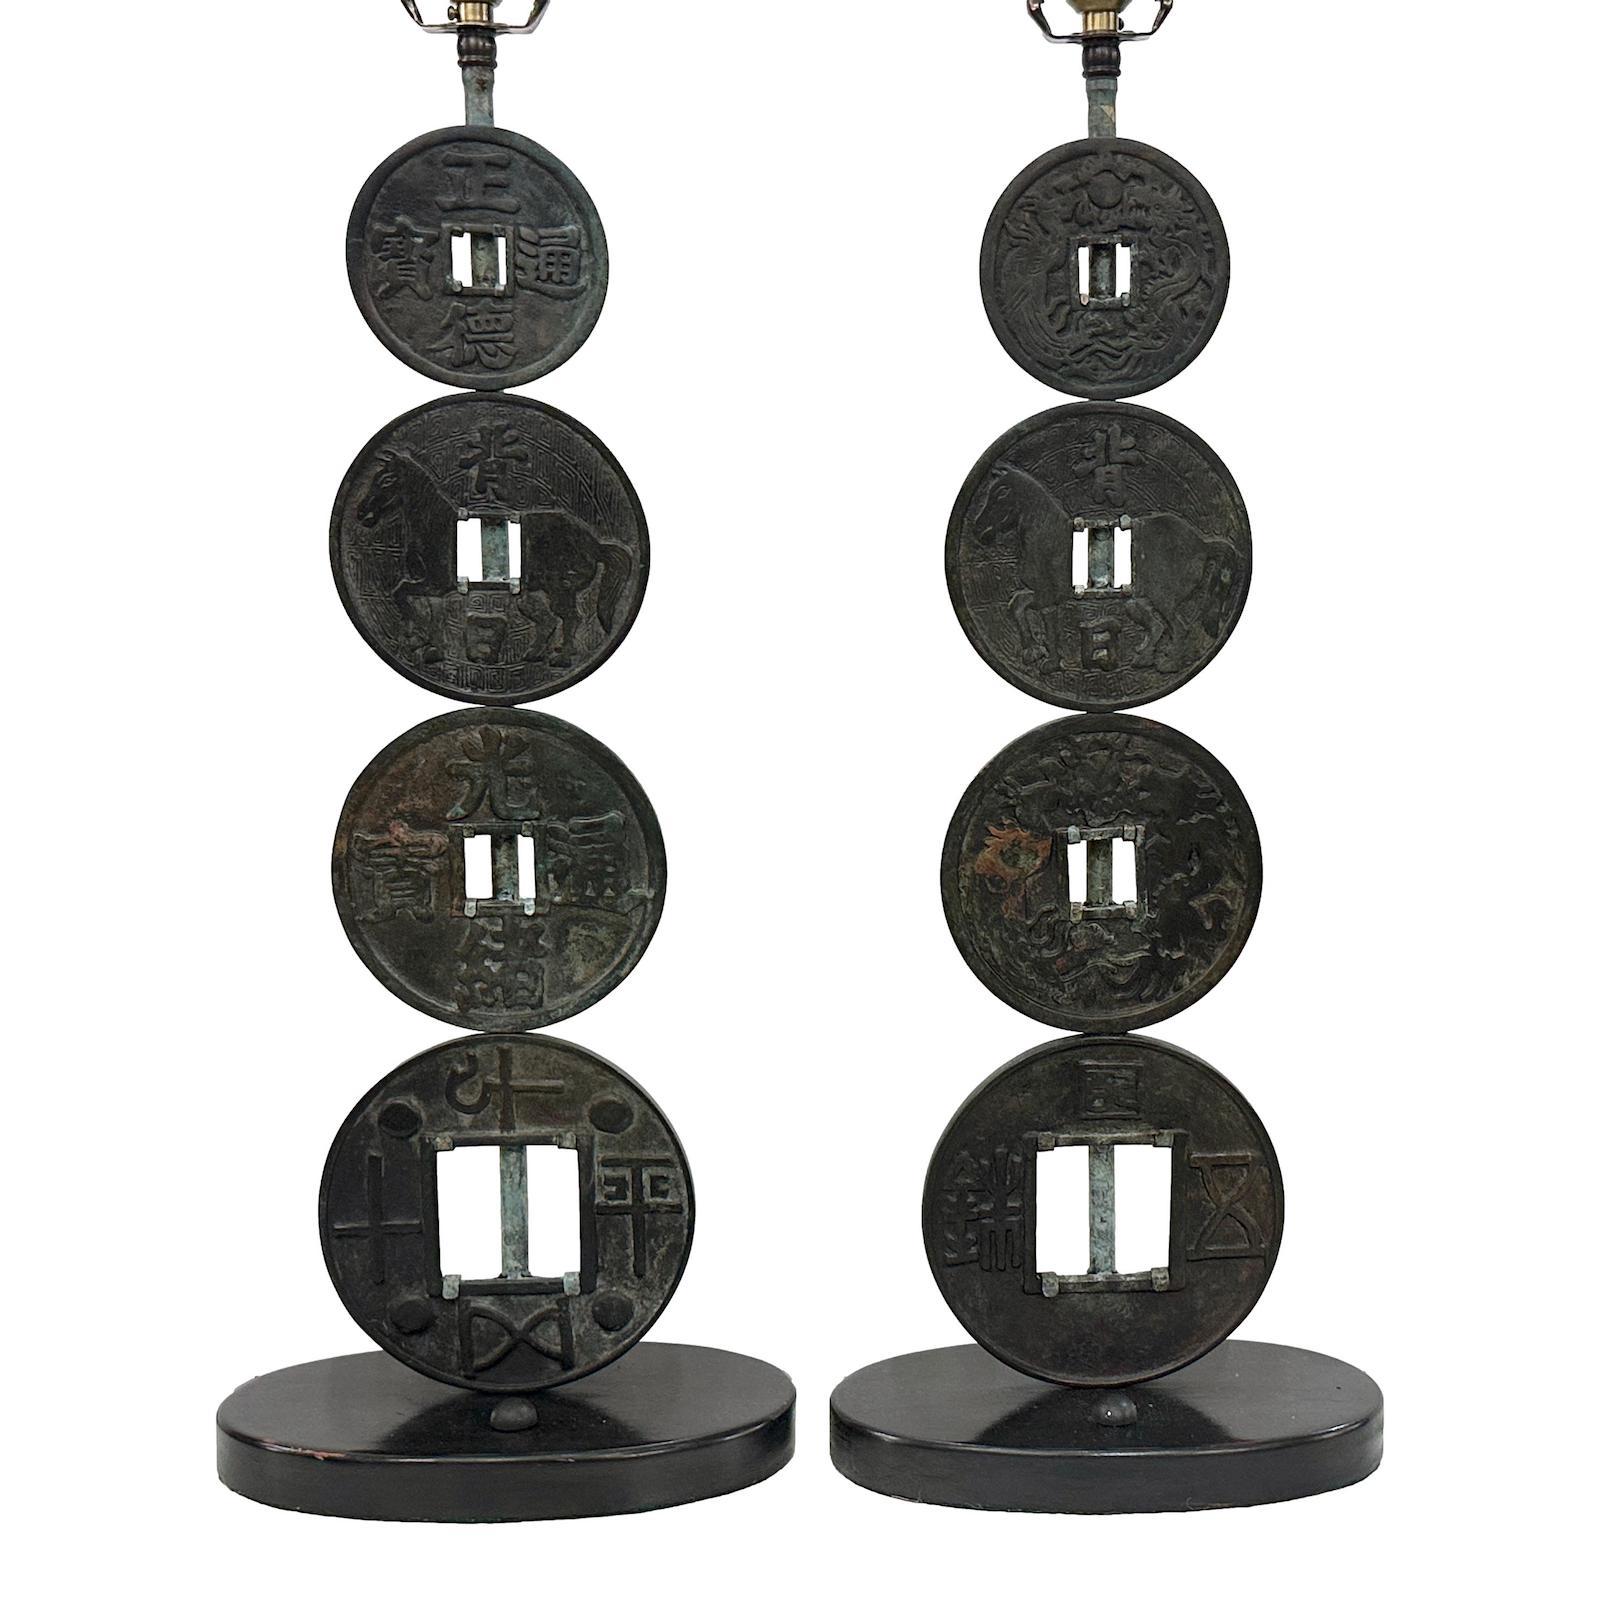 Pair of circa 1950's Chinese patinated bronze coins lamps.

Measurements:
Height of body: 23